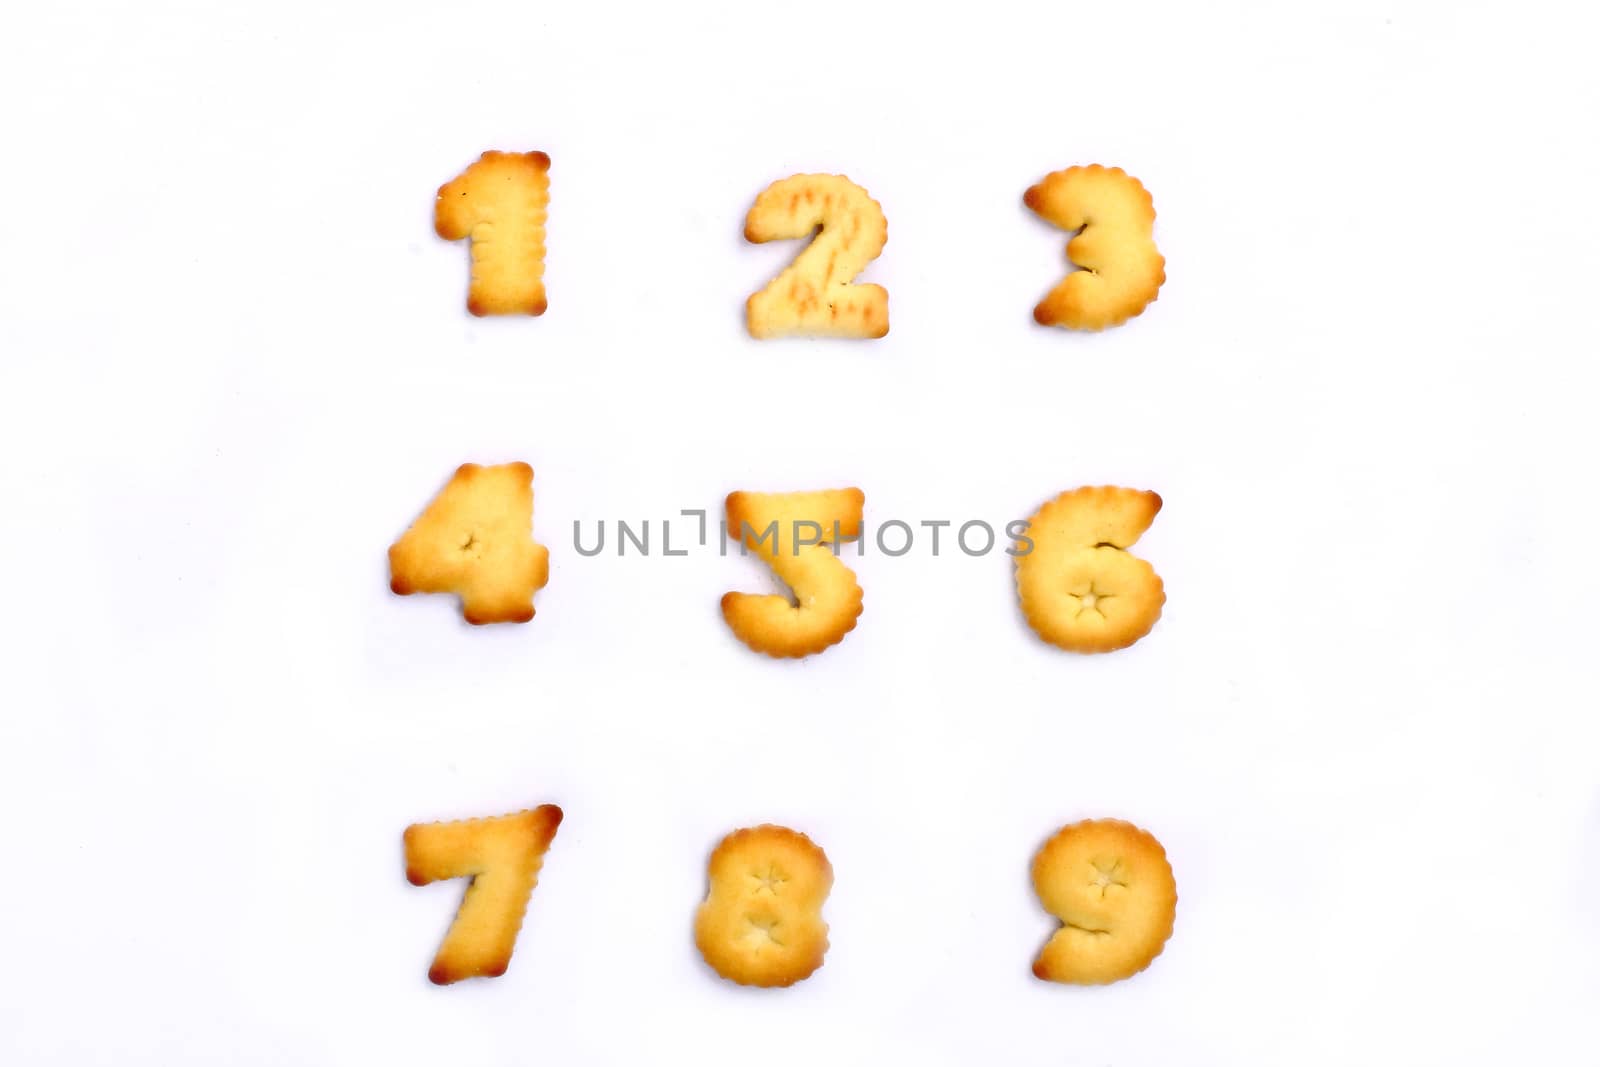 cookkies number cracker on white background by myrainjom01